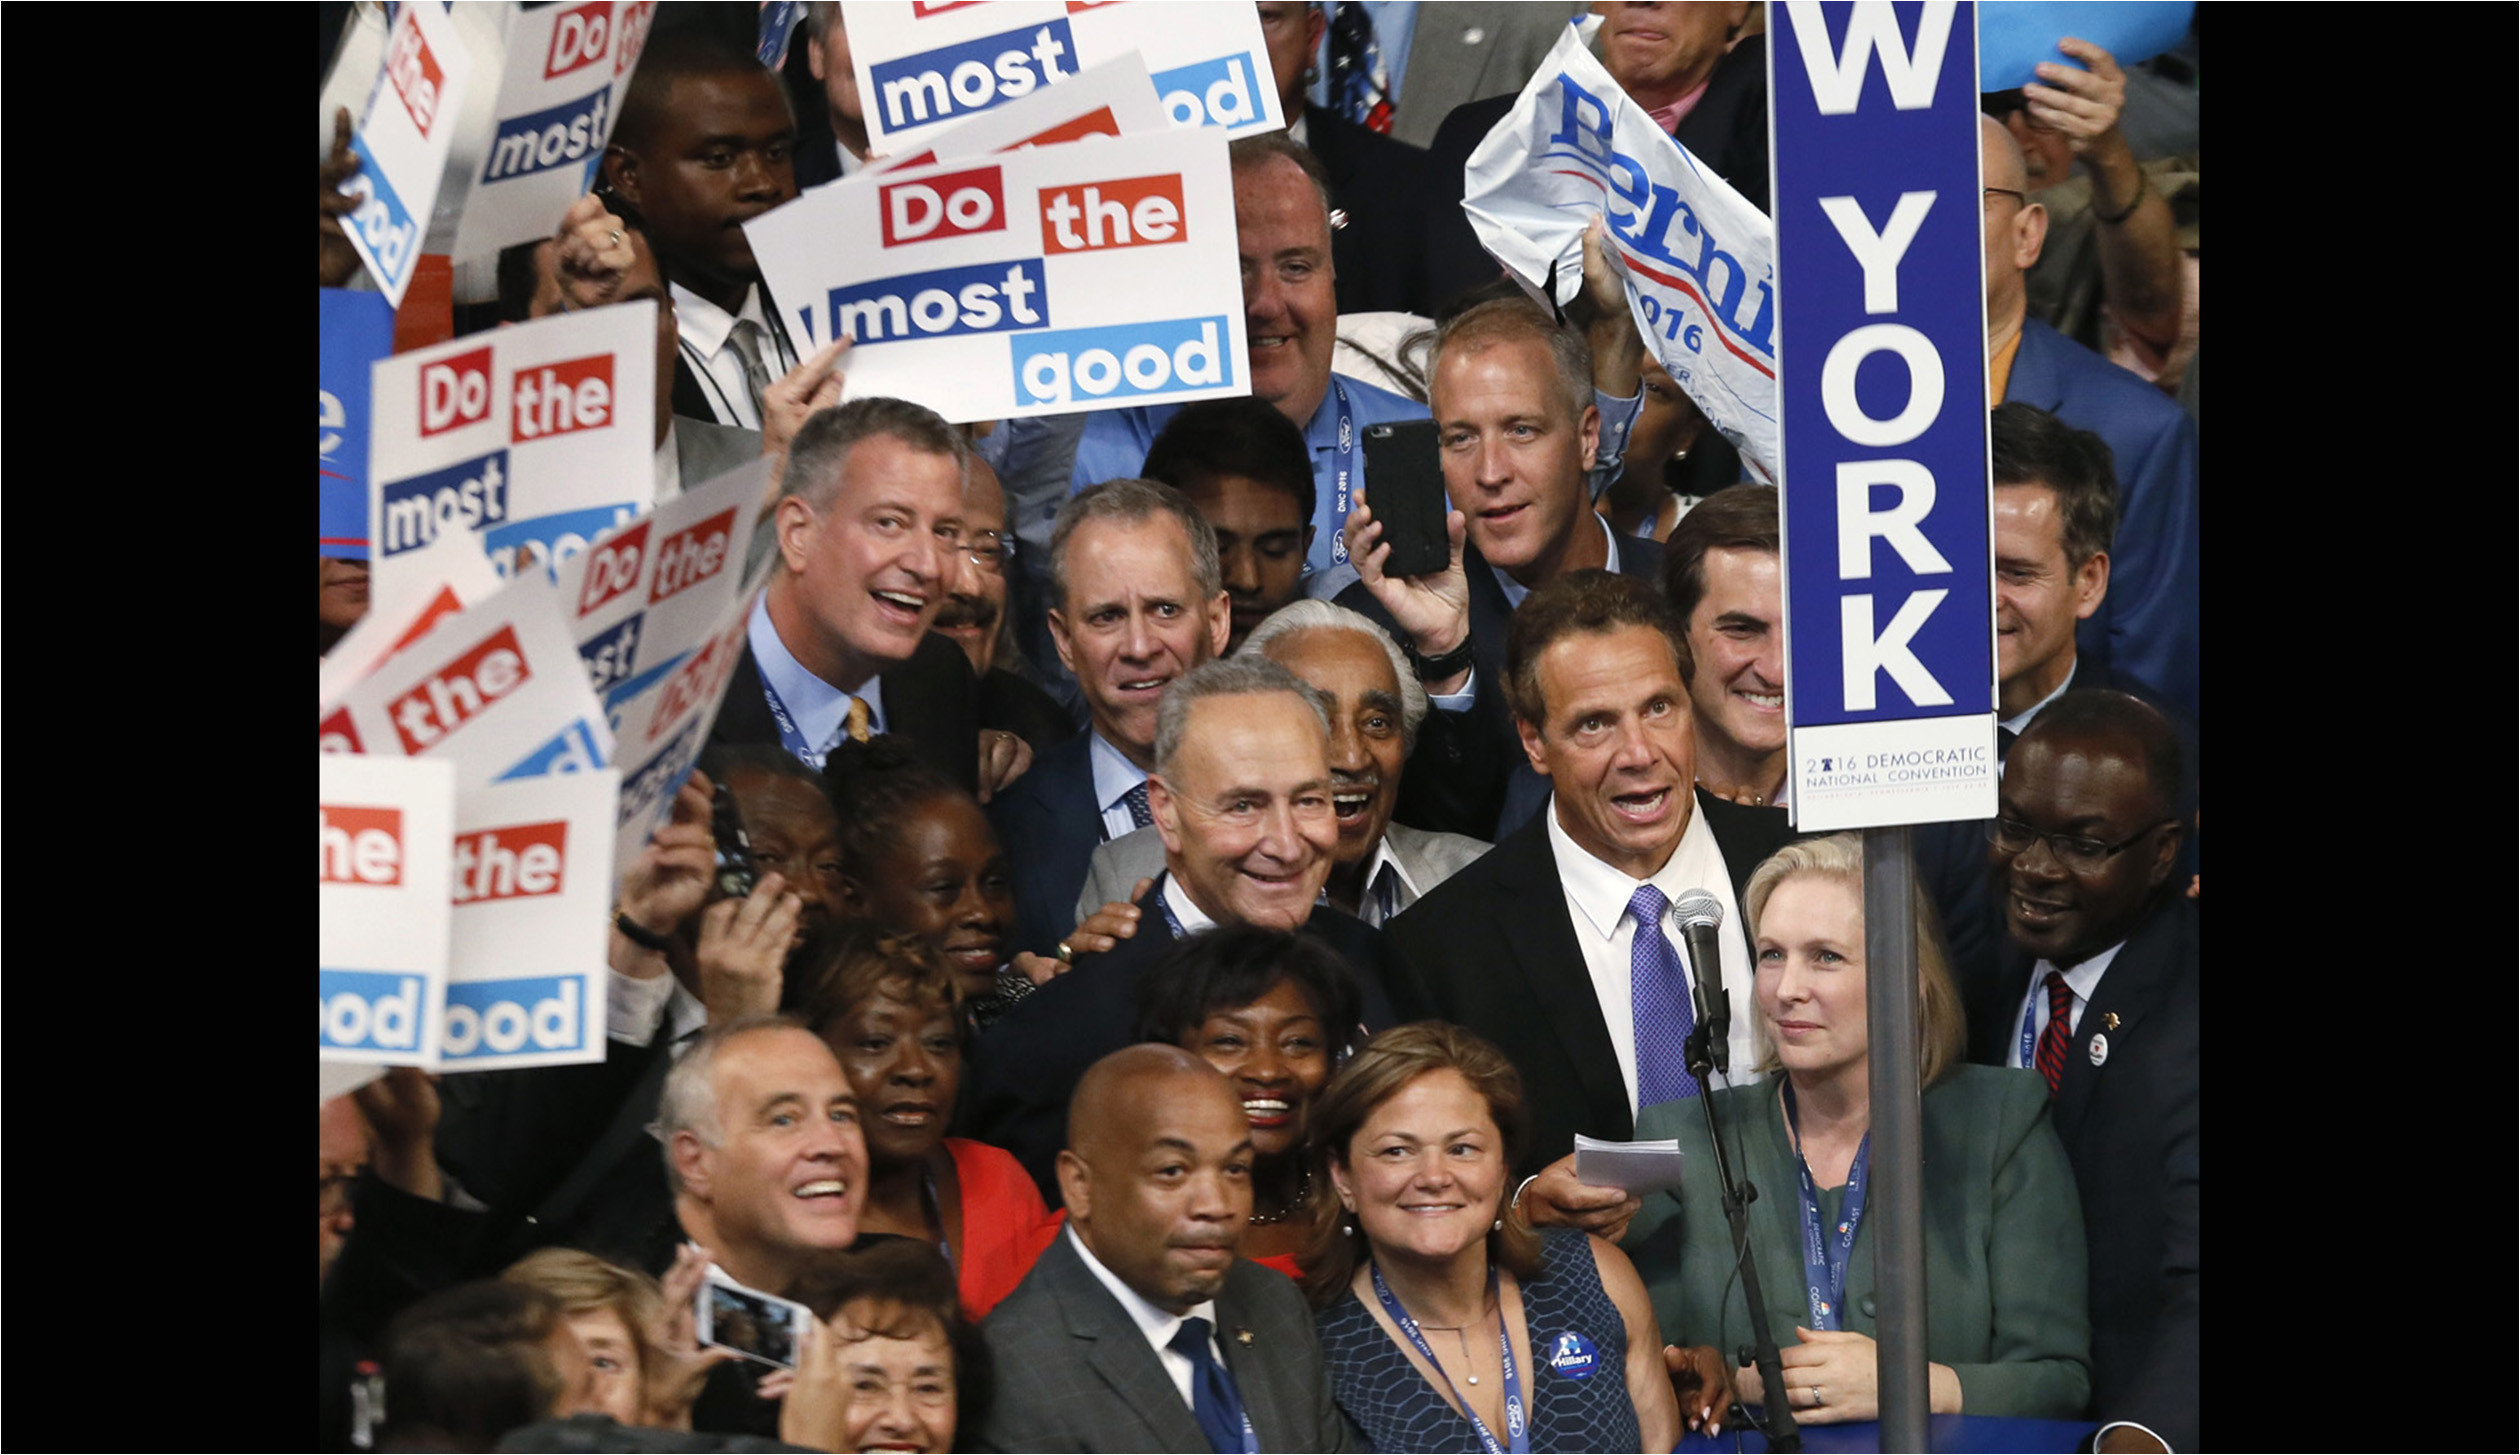 delegates from the state of new york stand with signs